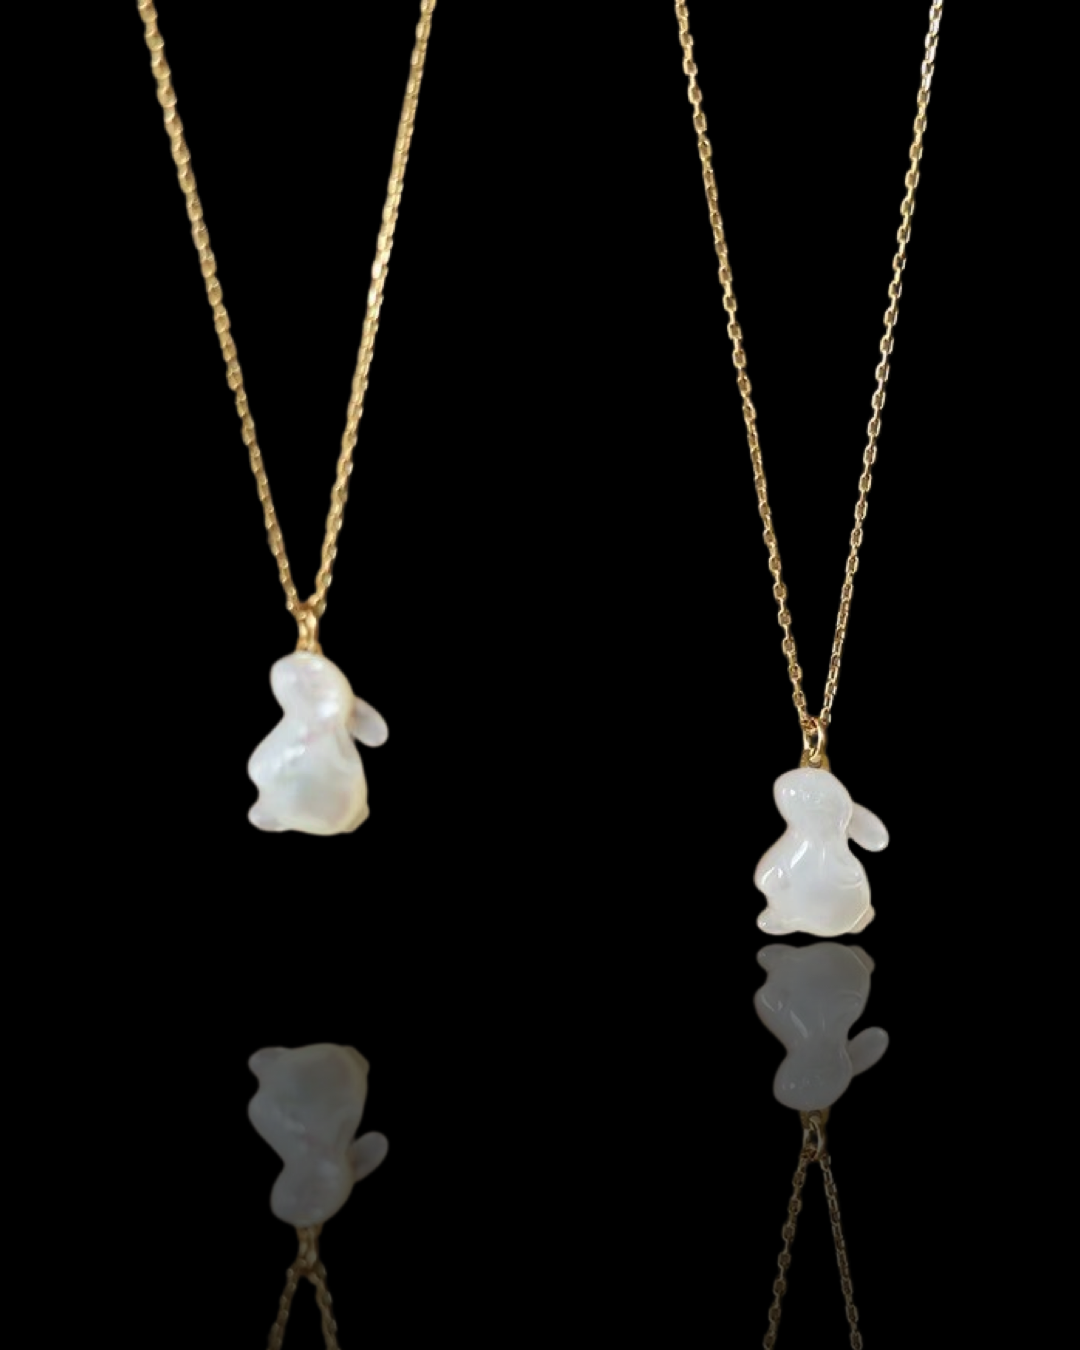 Mother of Pearl Bunny Pendant Necklace